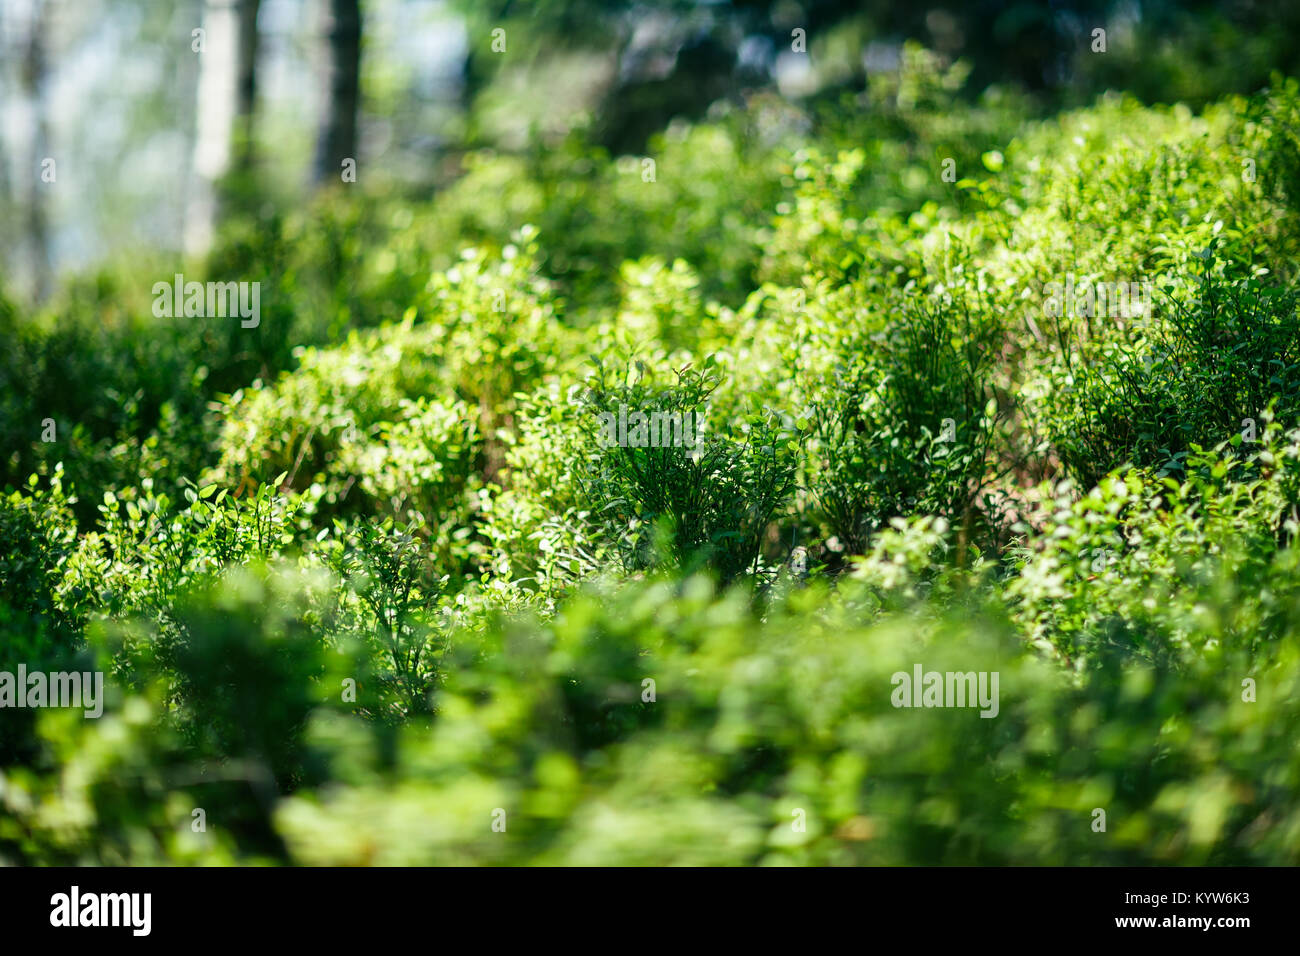 Green bushes in the forest, close-up. Dense thickets of living plants in wild. Picturesque greenery, foreground in focus. Nature background Stock Photo